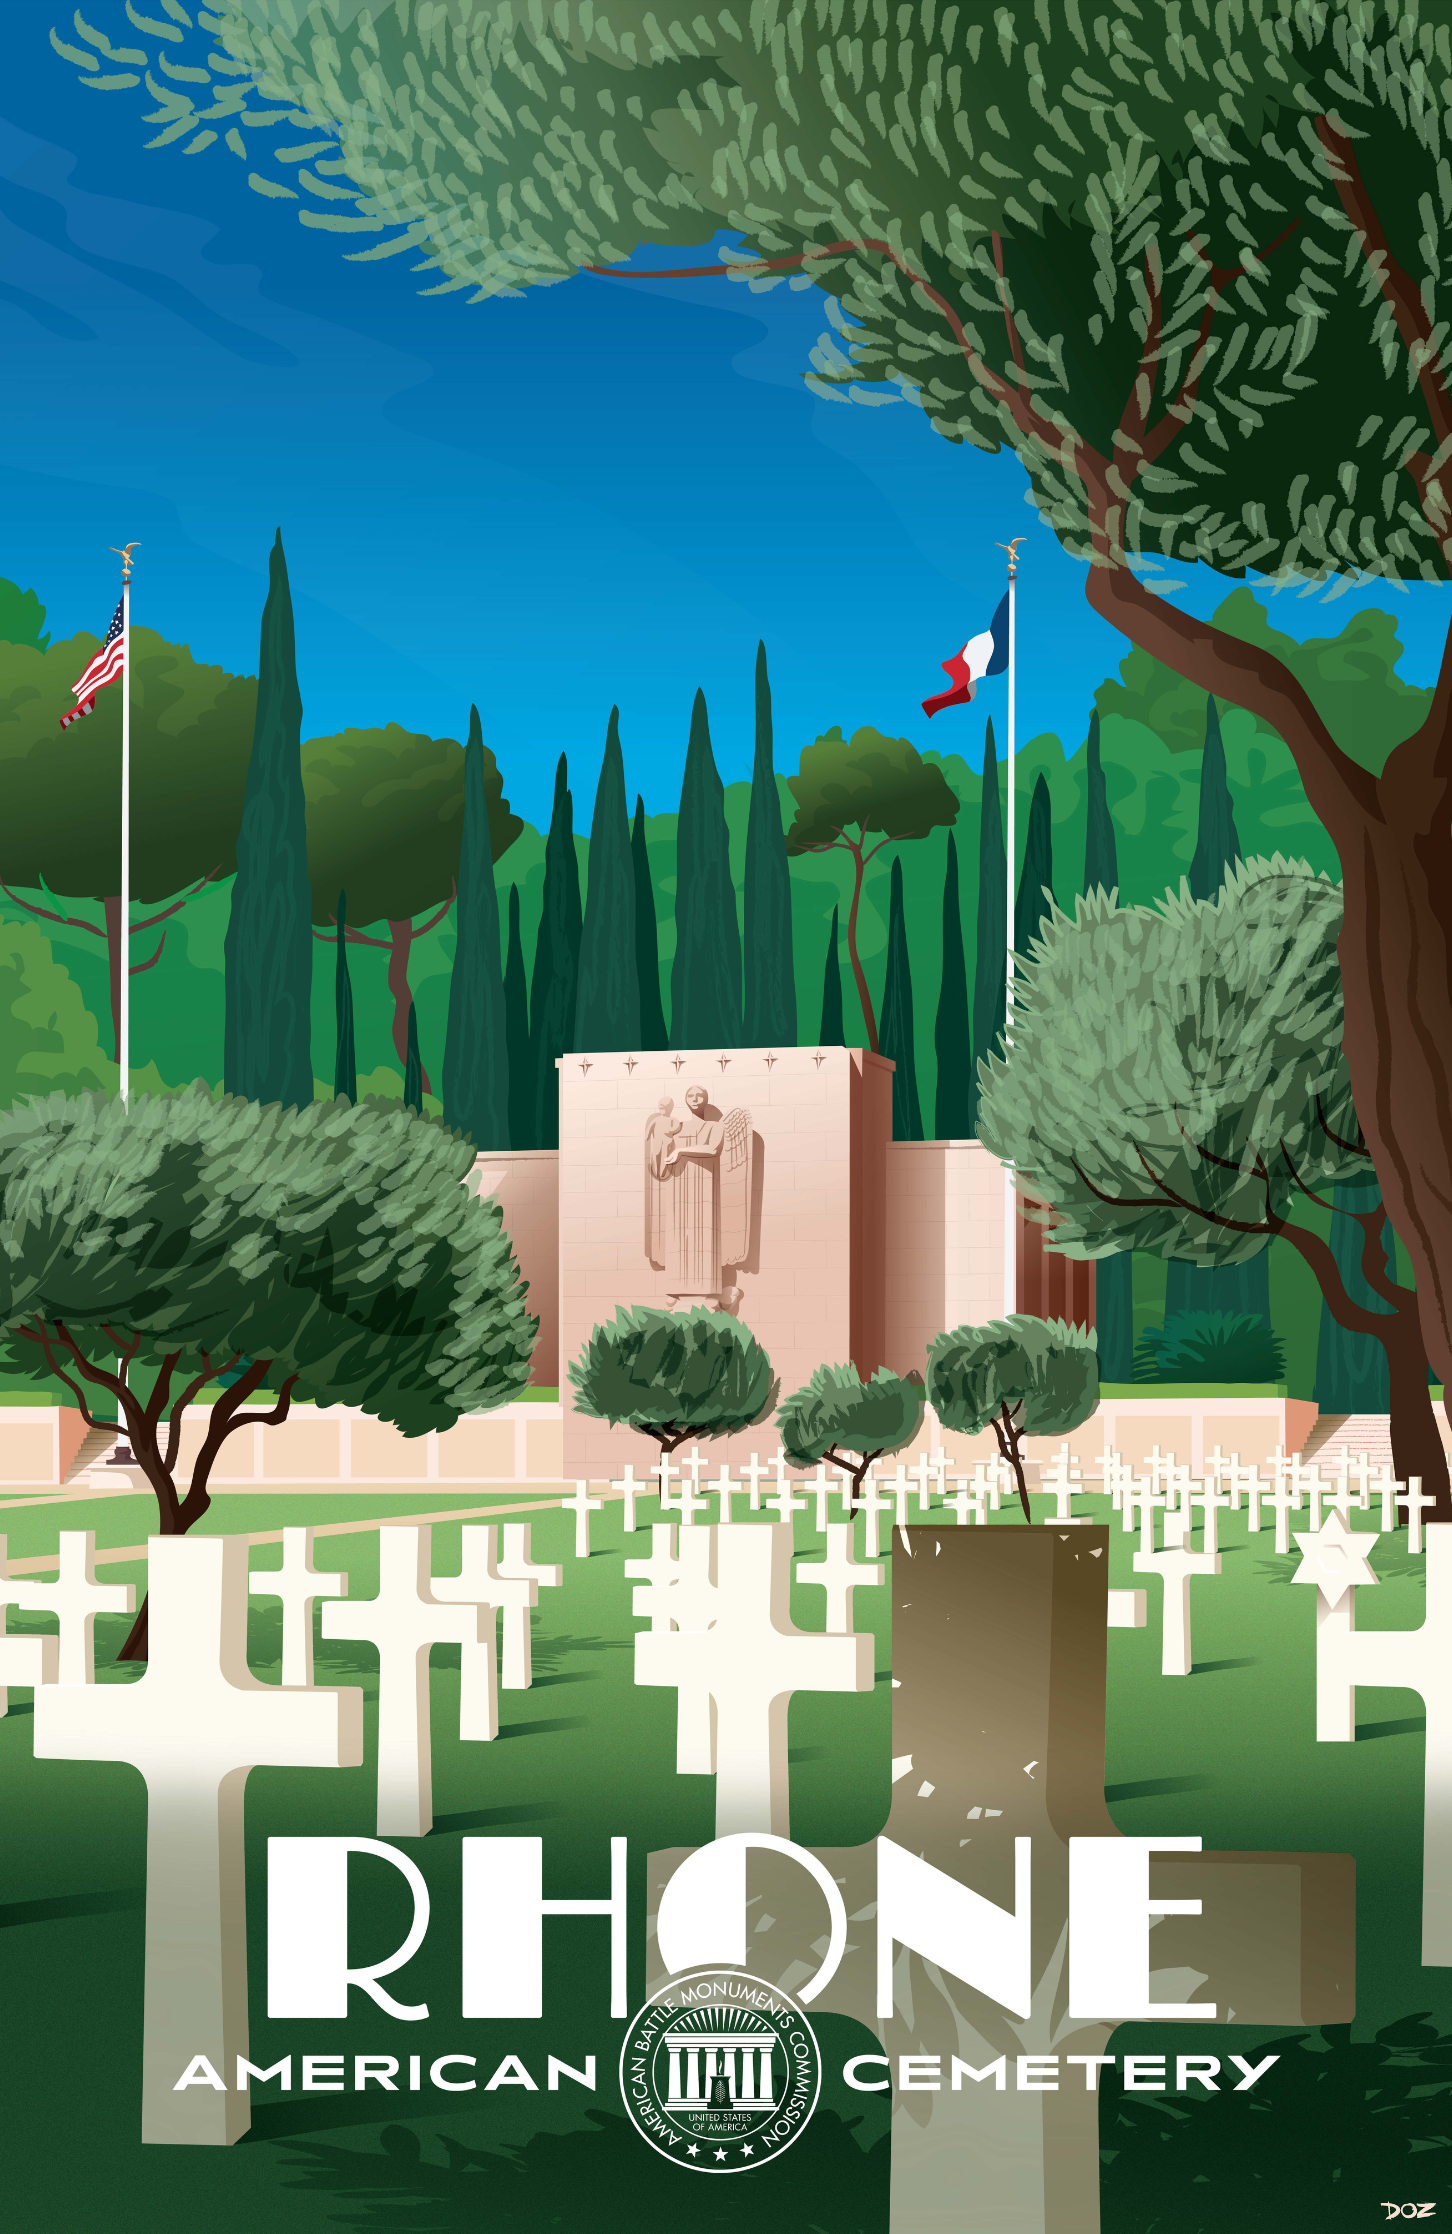 Vintage poster of Rhone American Cemetery created to mark ABMC Centennial